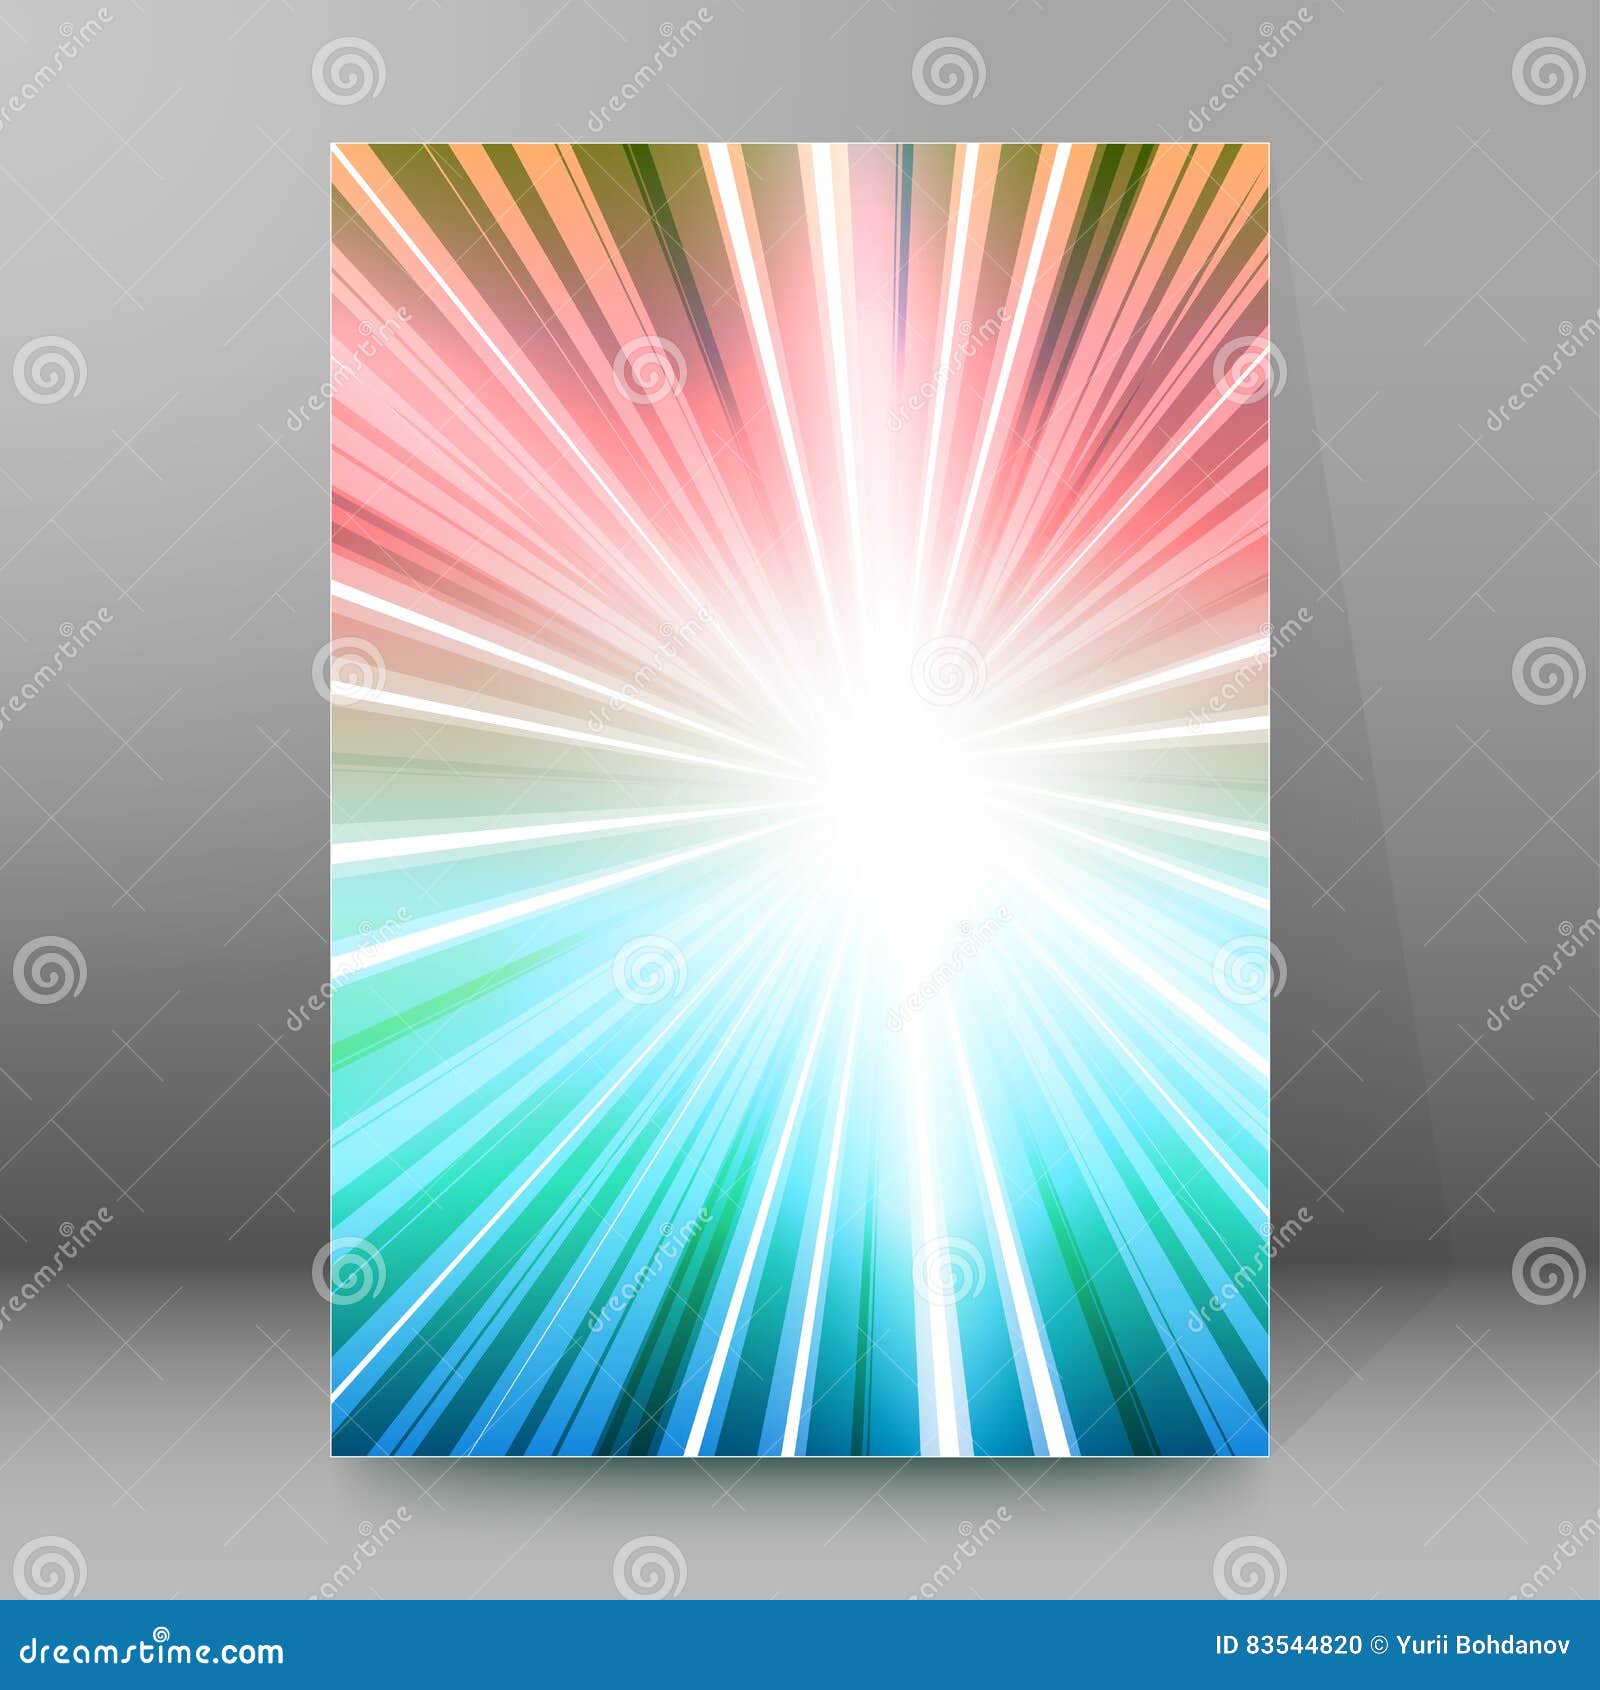 Background Report Brochure Cover Pages A4 Style Abstract Glow92 Stock  Vector - Illustration of booklet, banner: 83544820